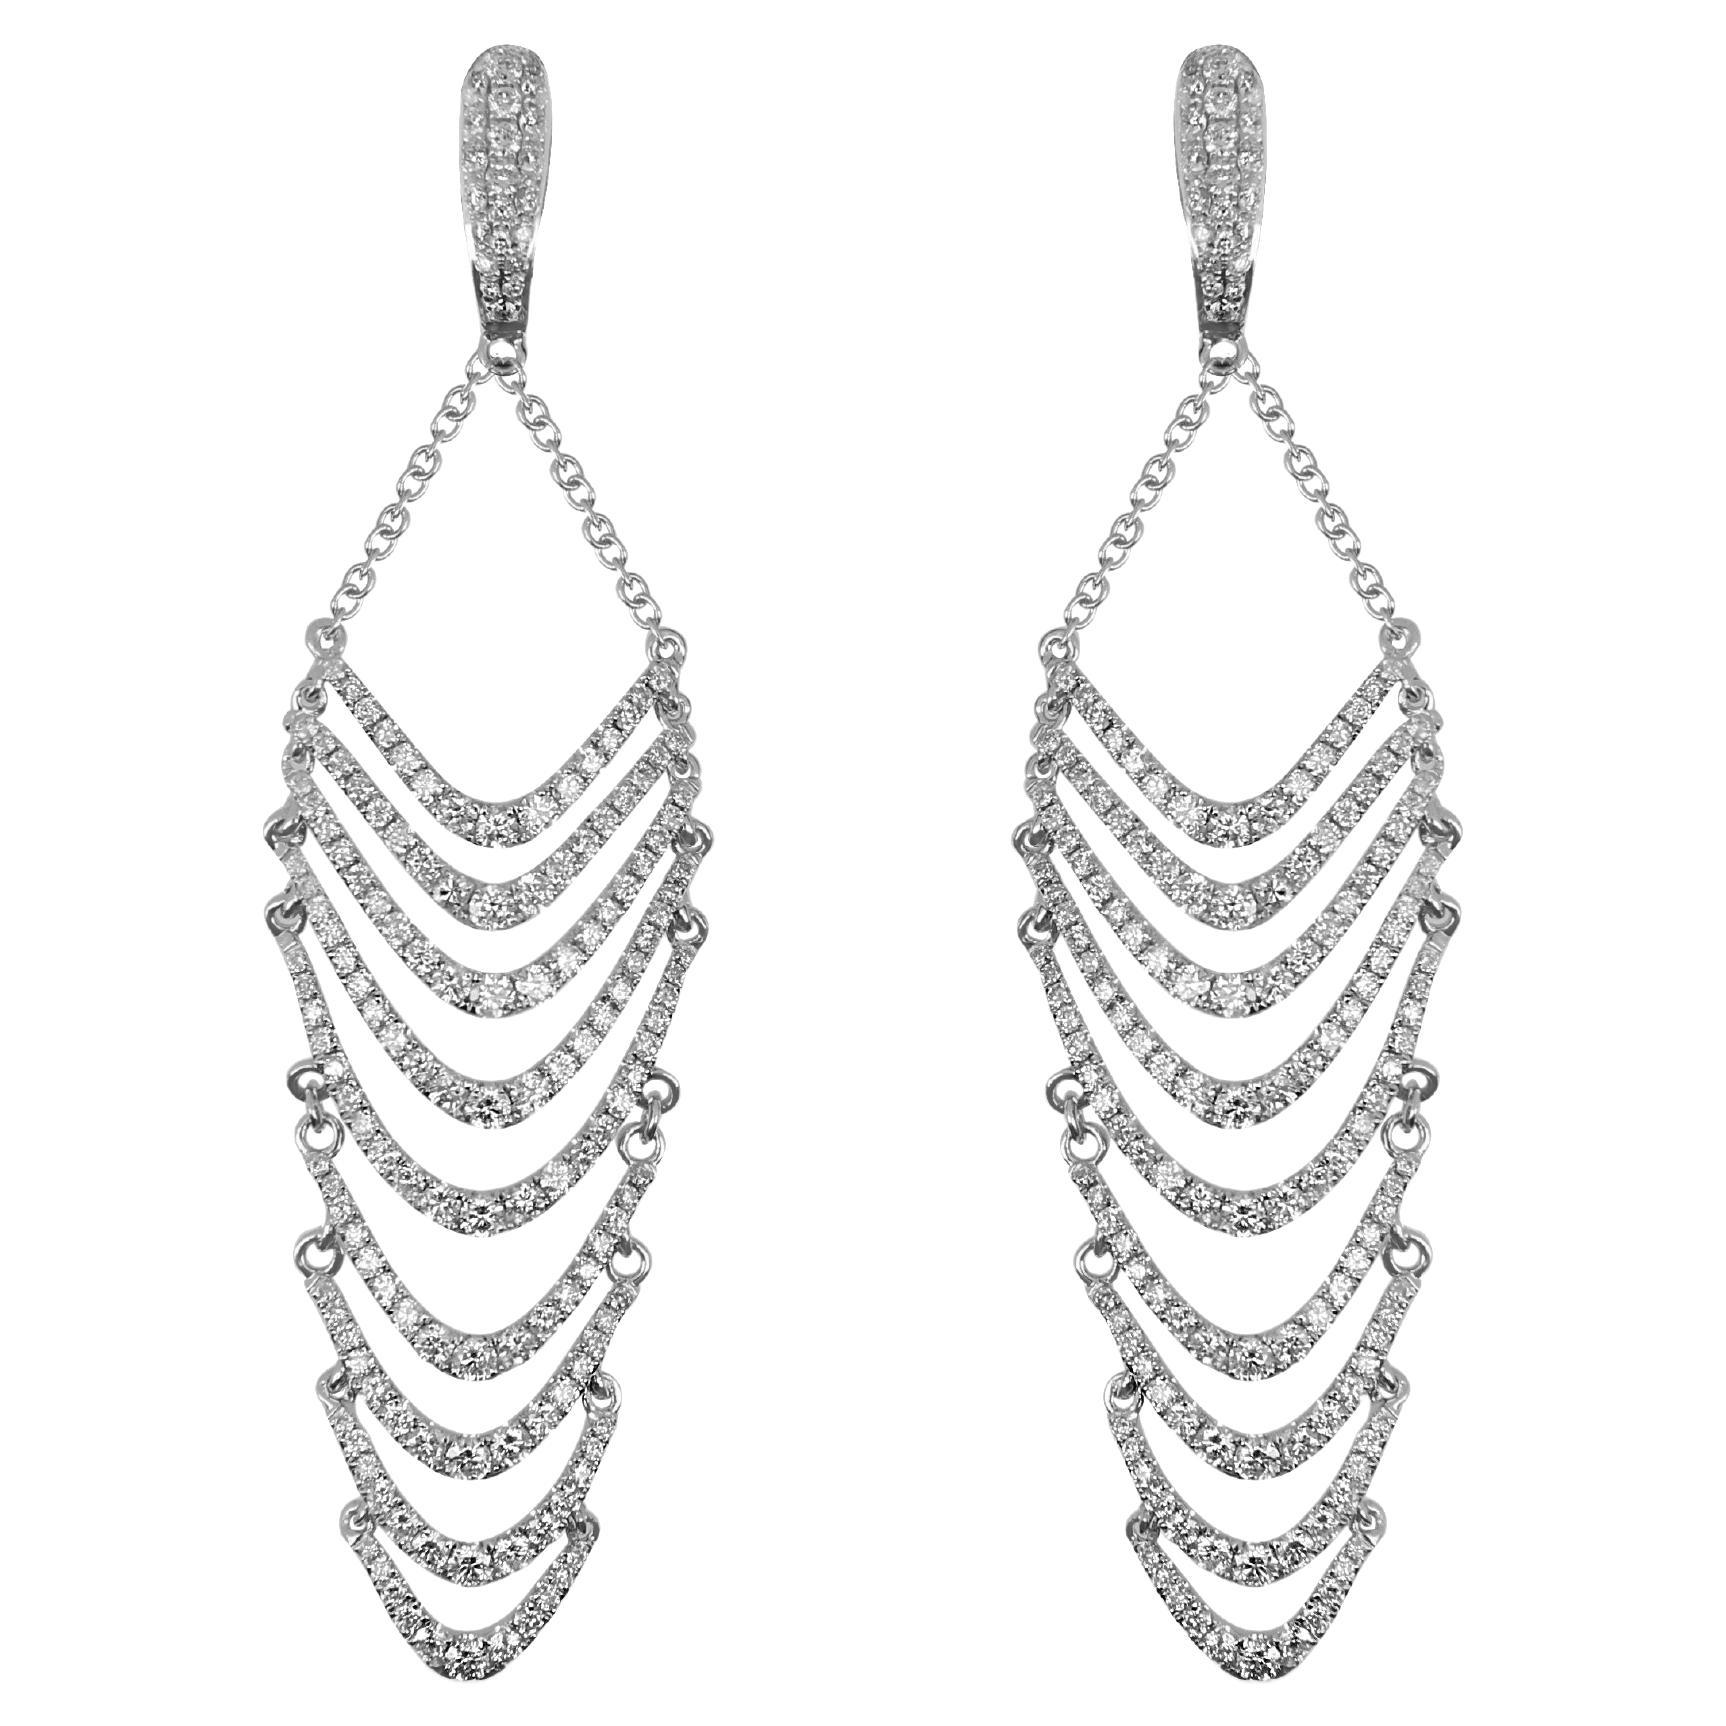 18k White Gold Dangling Earrings with Round Cut Diamonds 